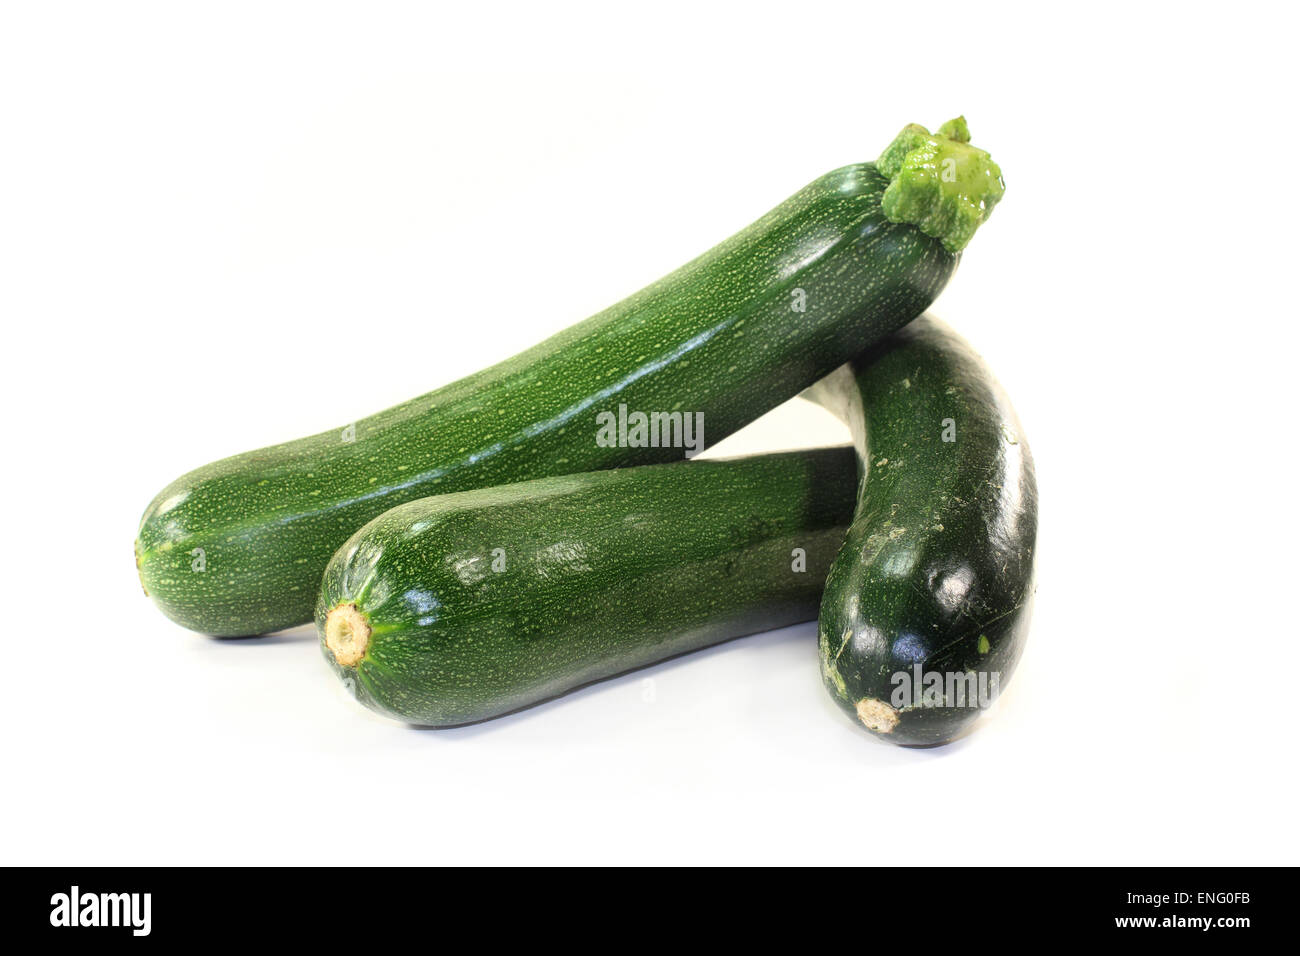 Courgette verte, raw in front of white background Banque D'Images